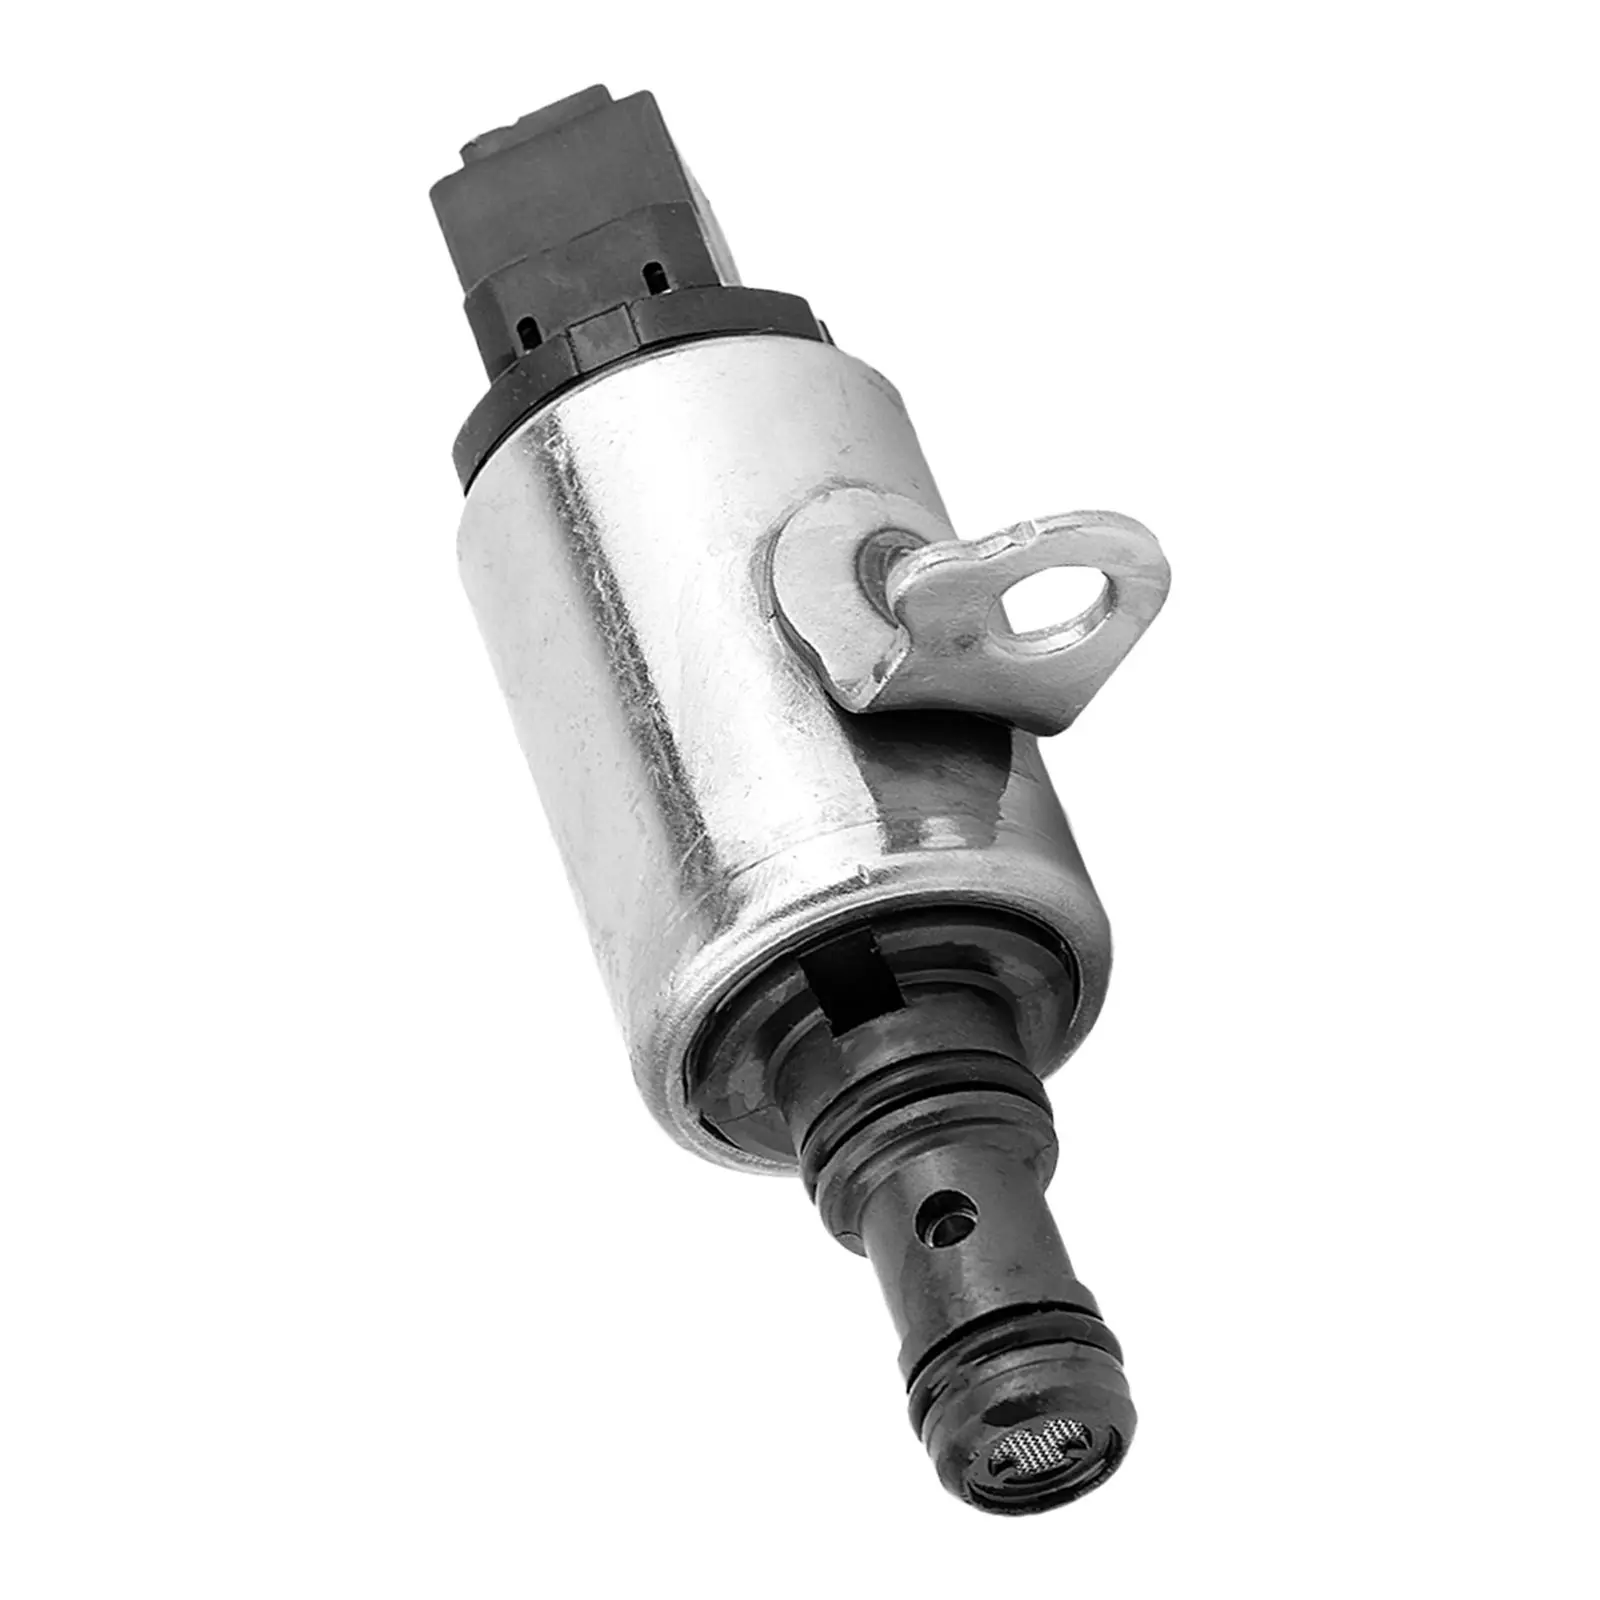 Transmission  Solenoid 28500-PRP-004 Replace for Honda Accord Element